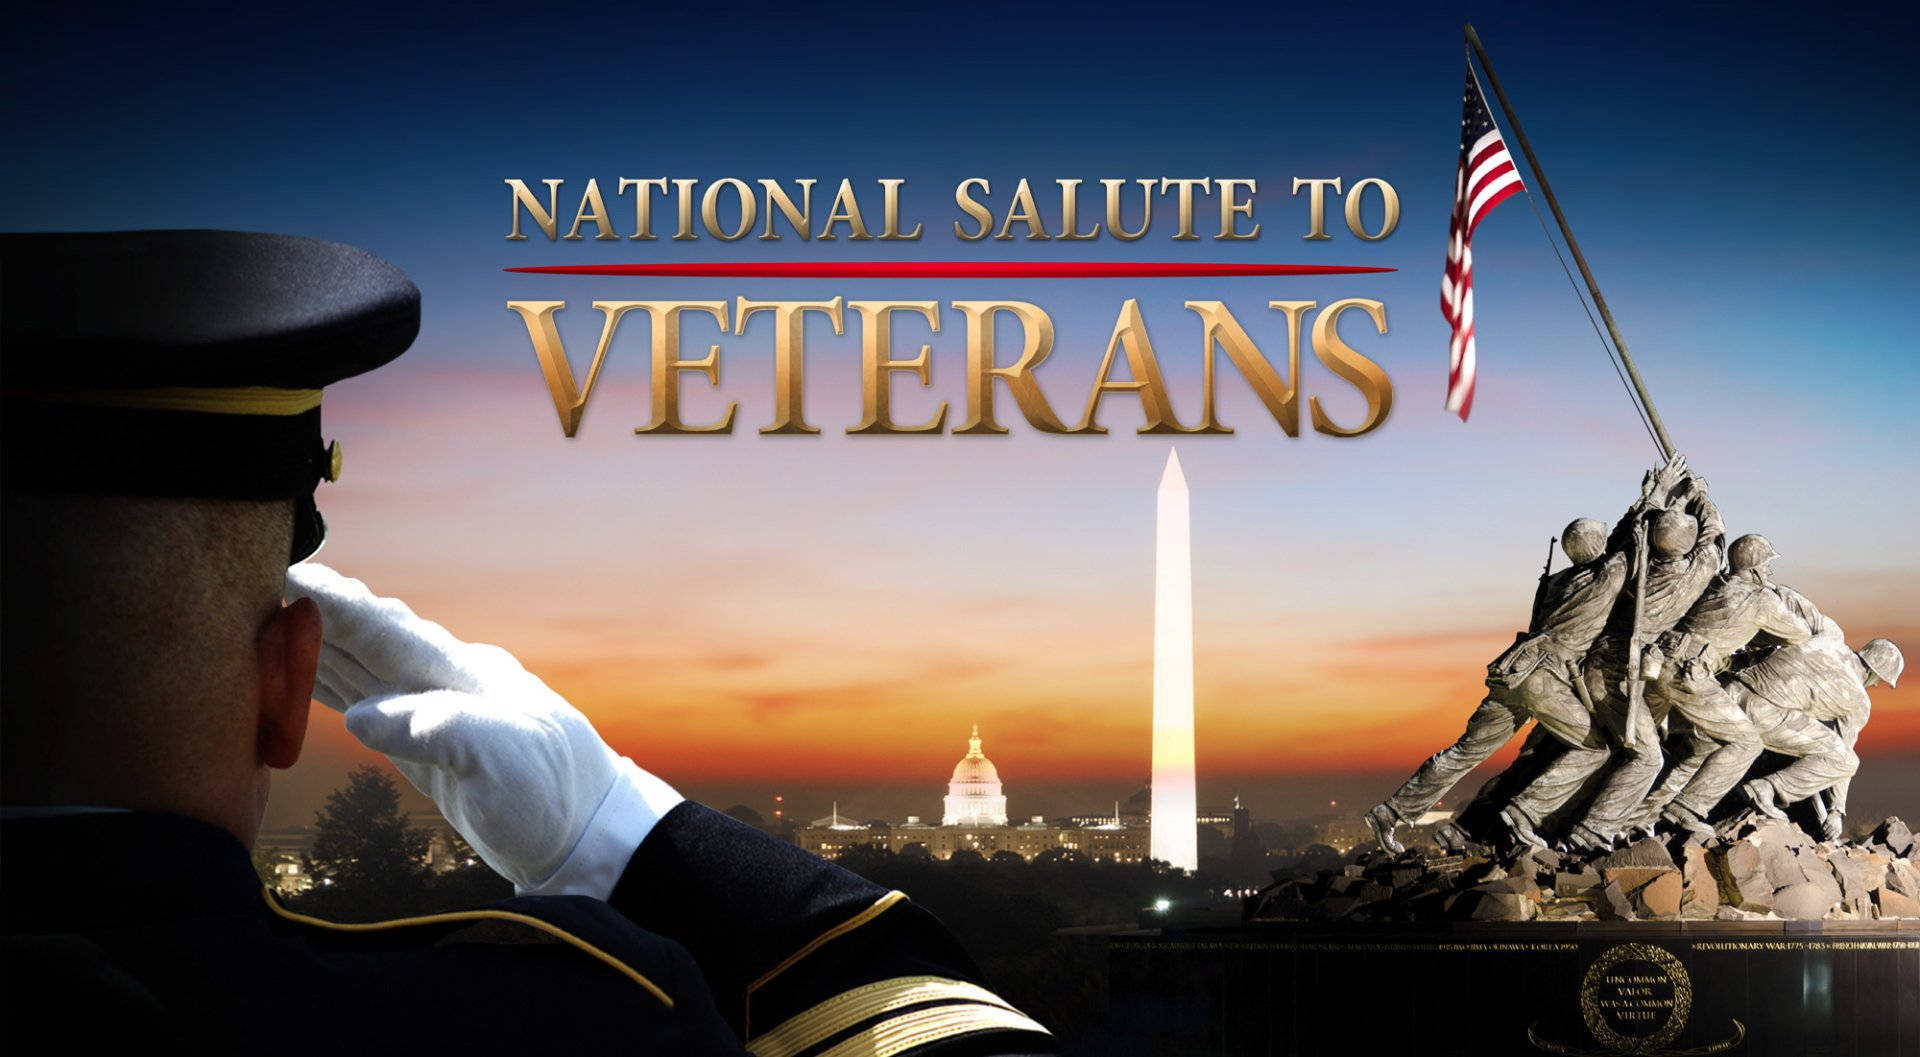 Veterans Day National Salute Background